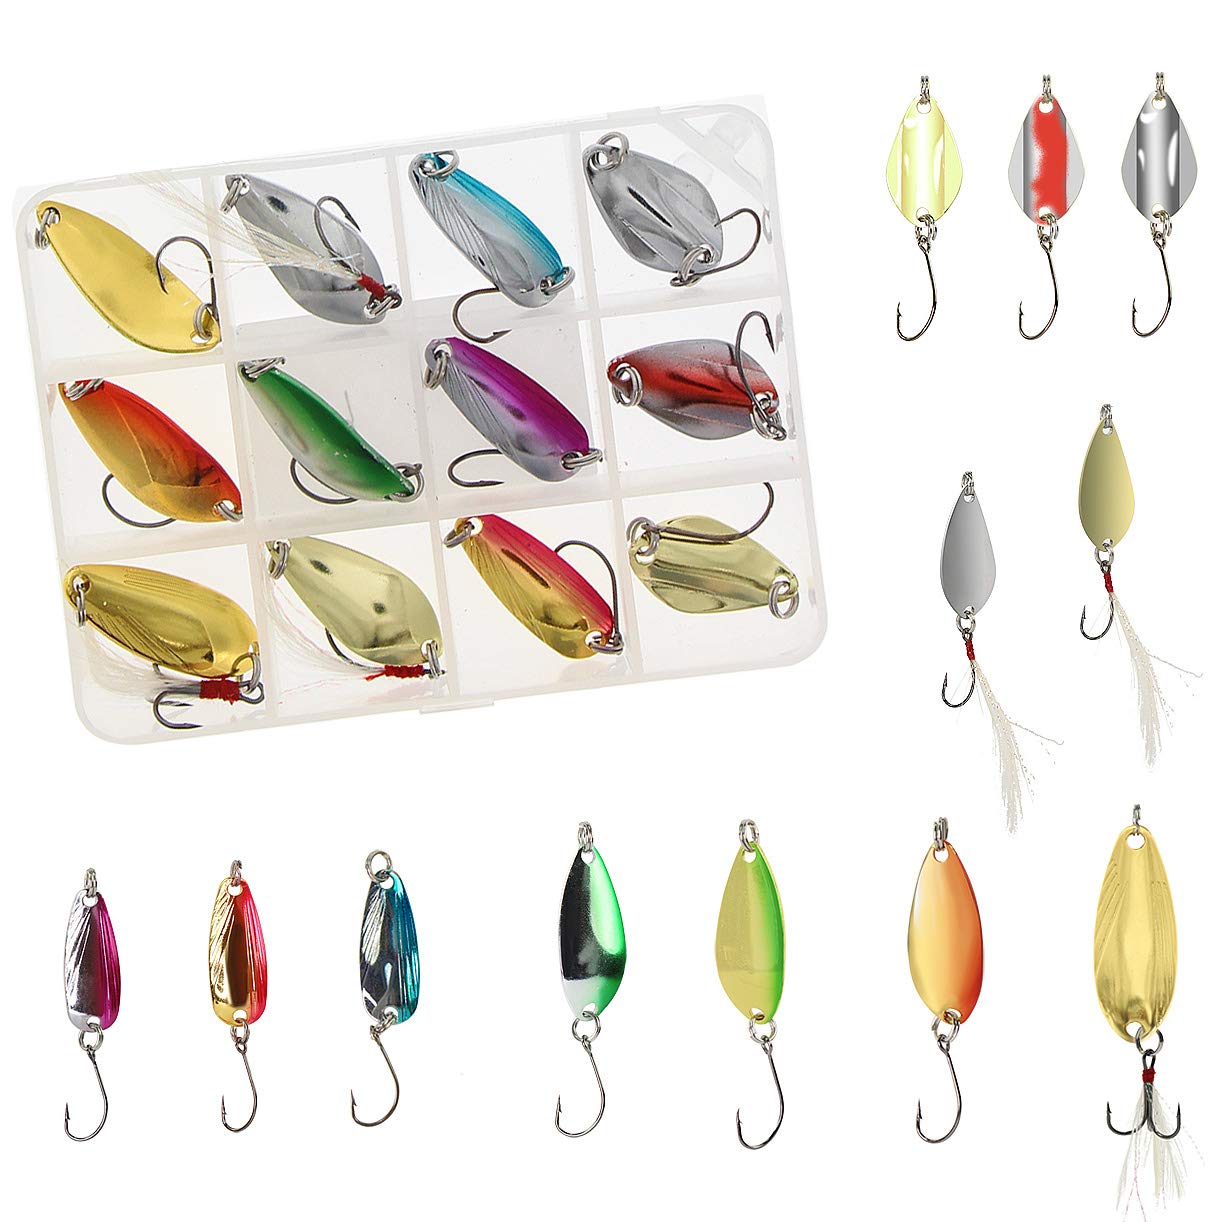 Fishing Spoon Lure Set Metal Baits for Trout Char and Perch Fishing with  Tackle Box (Pack of 12) TYPE: A